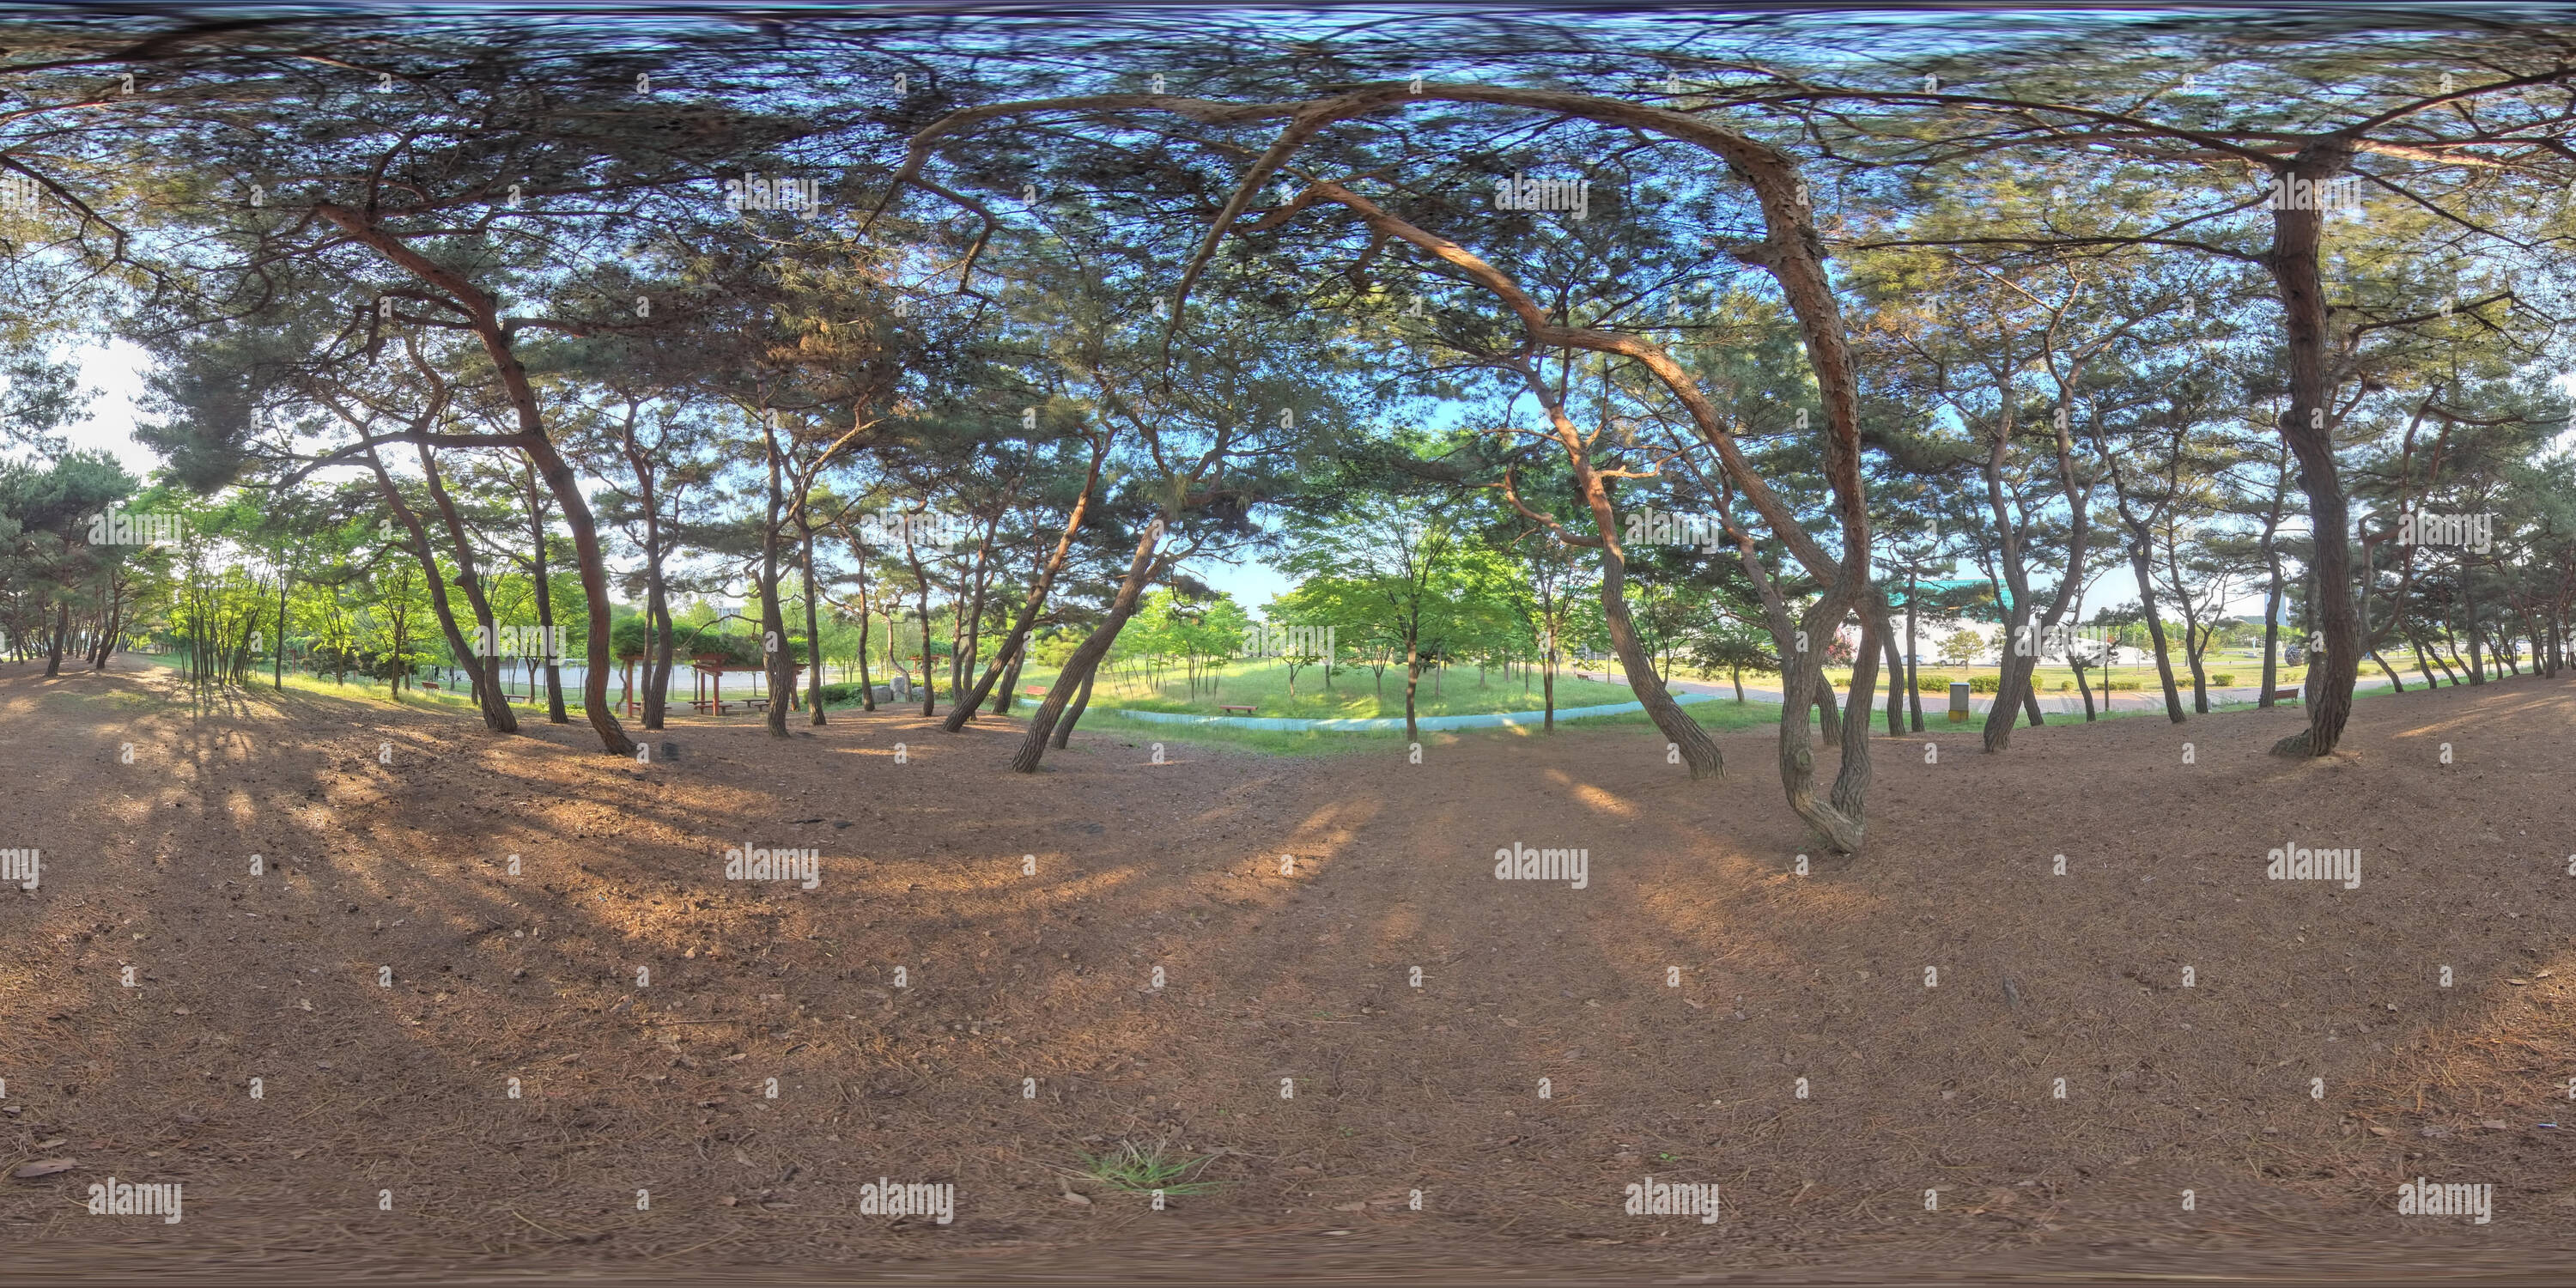 360 degree panoramic view of Ansan, South Korea - 12 June 2019. Panorama 360 degrees view in park. Forest and Park 360 image, VR AR content.